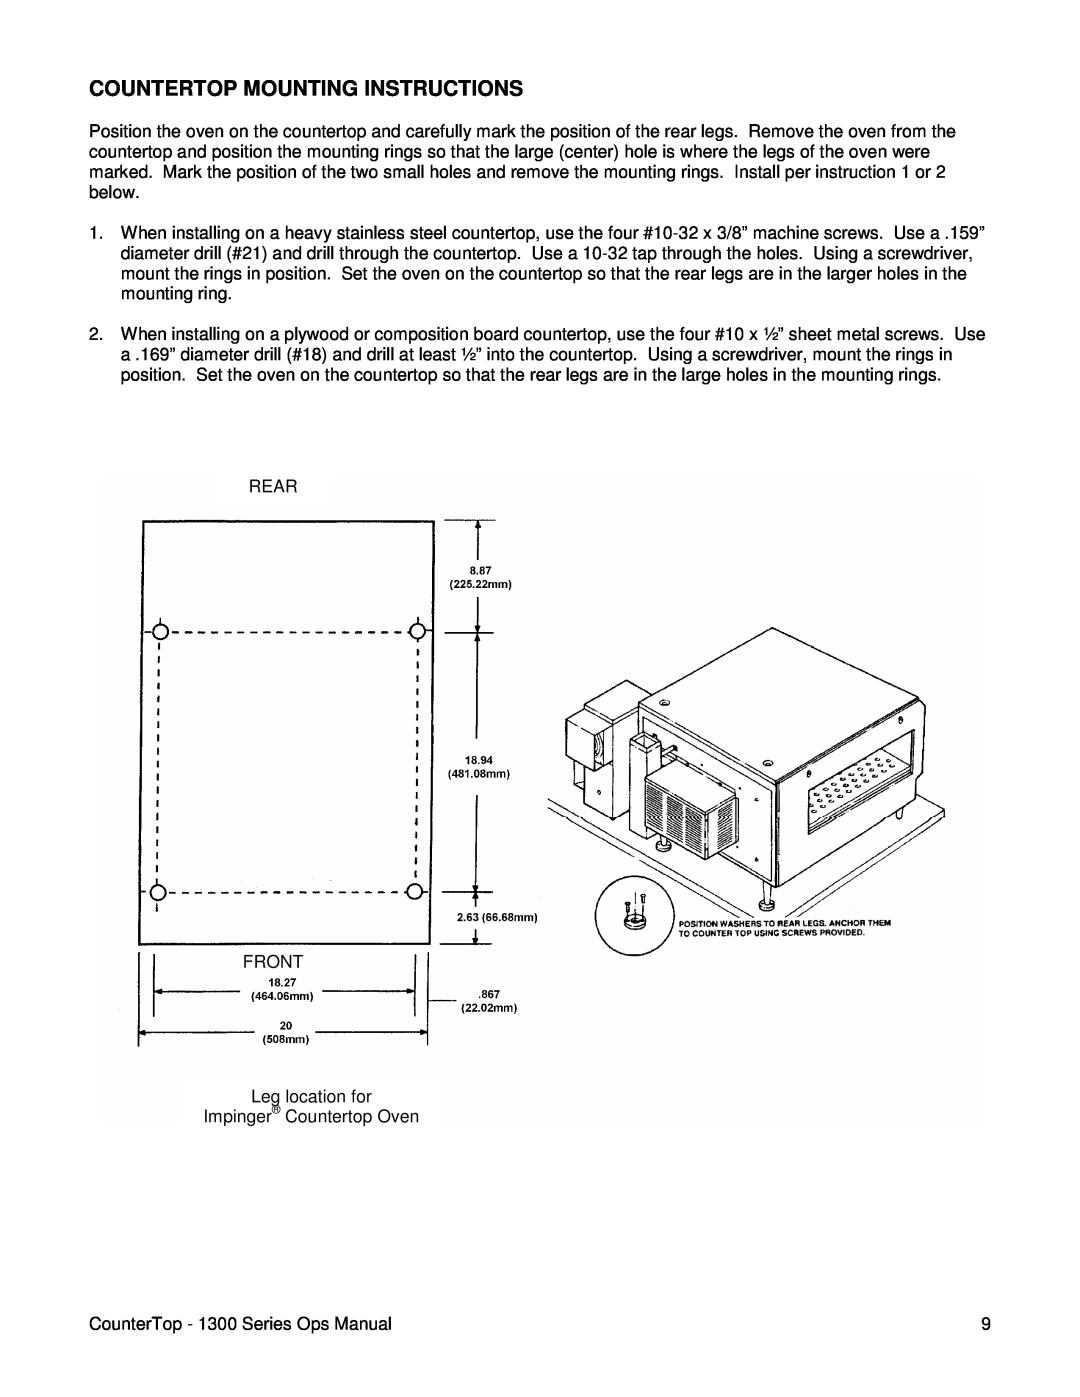 Lincoln 1300 Series operating instructions Countertop Mounting Instructions 